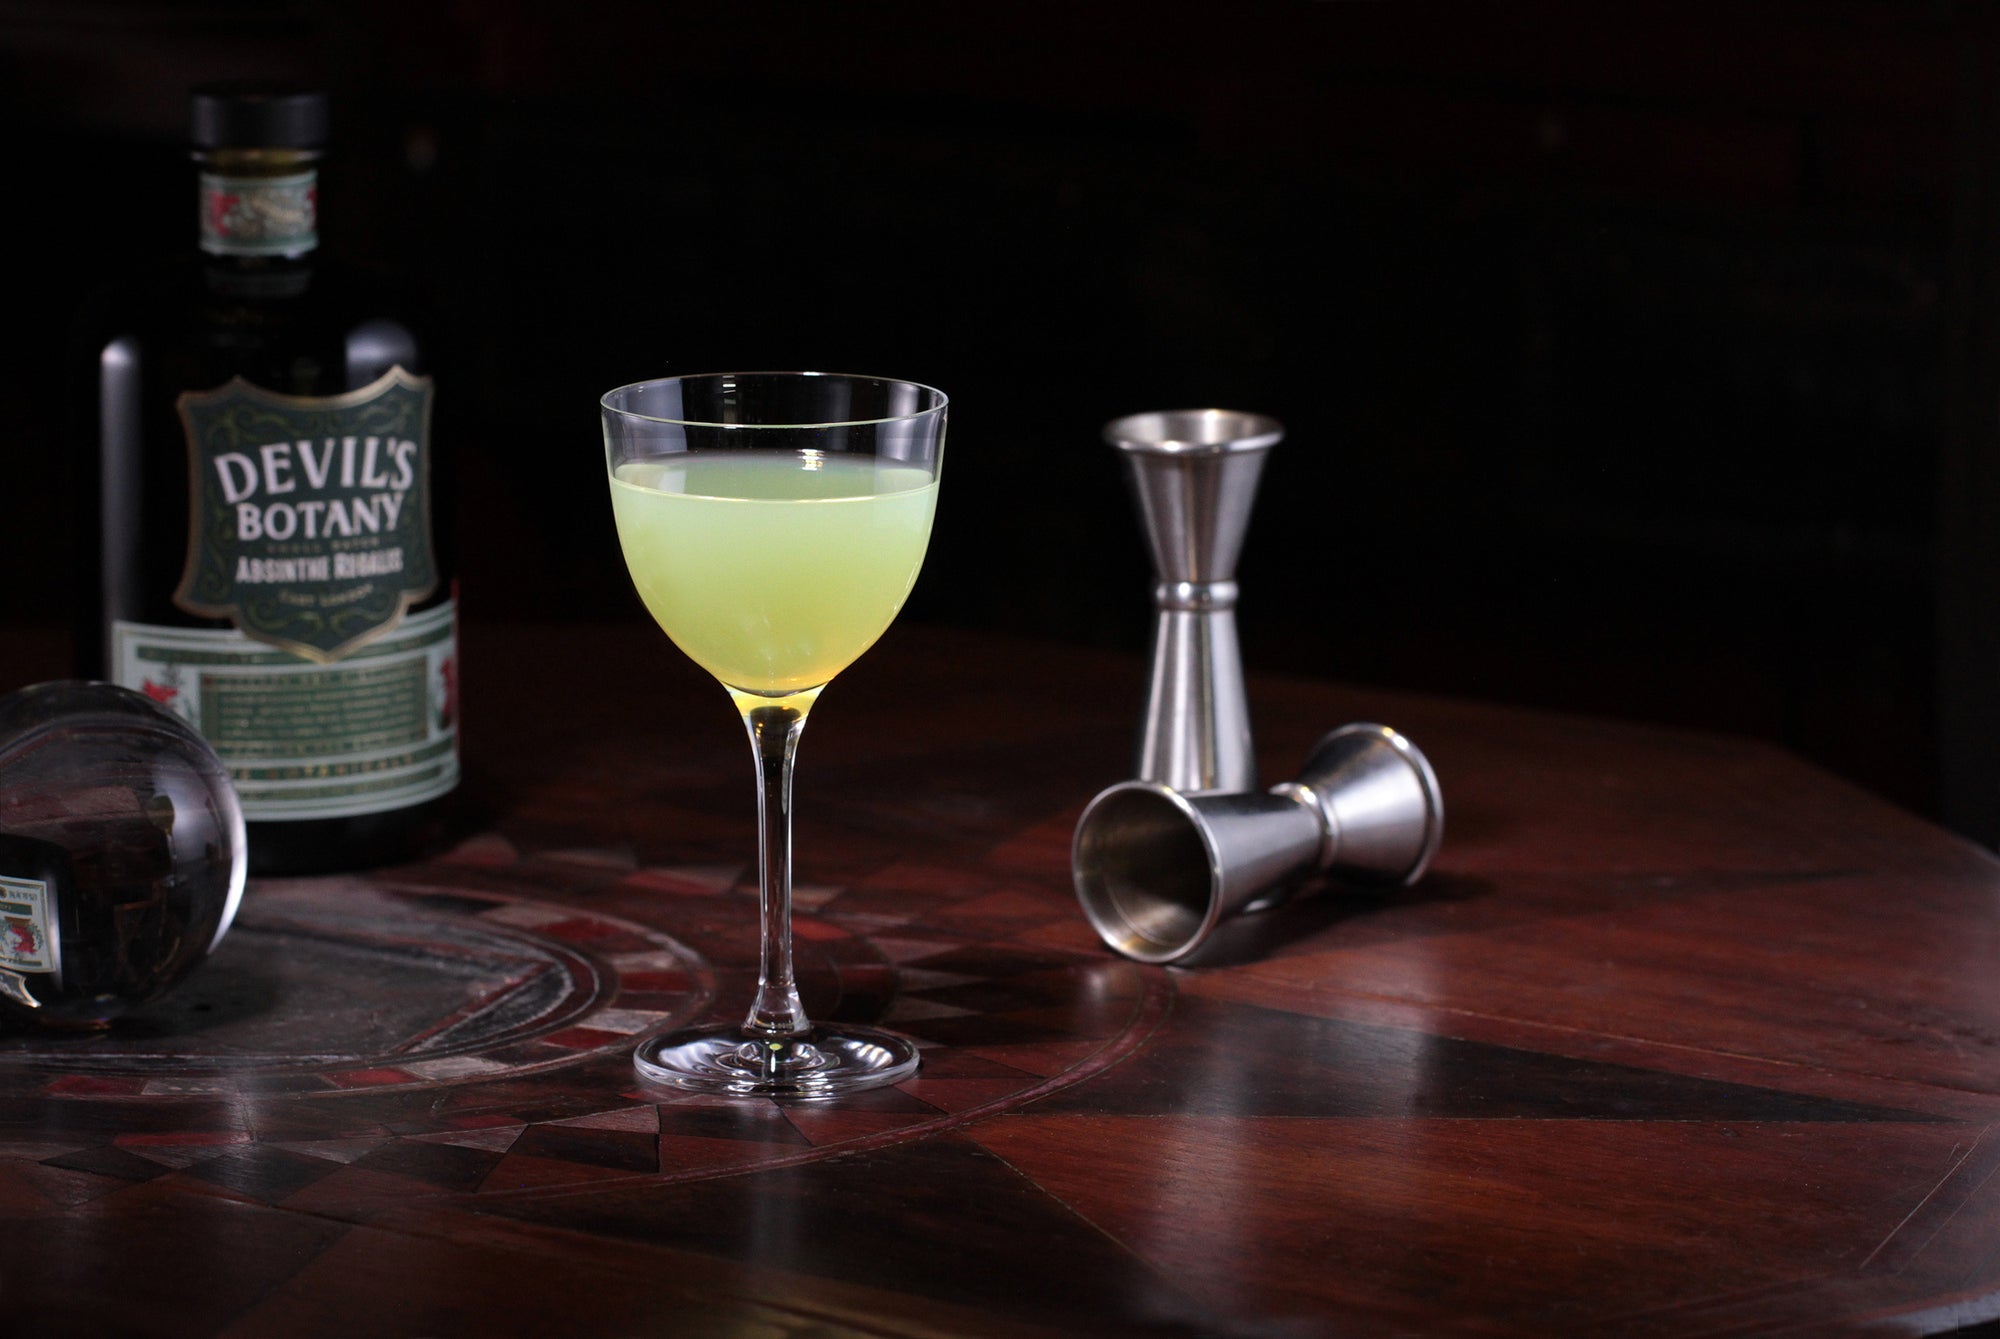 Devil's Botany Absinthe Cocktail - How to drink absinthe